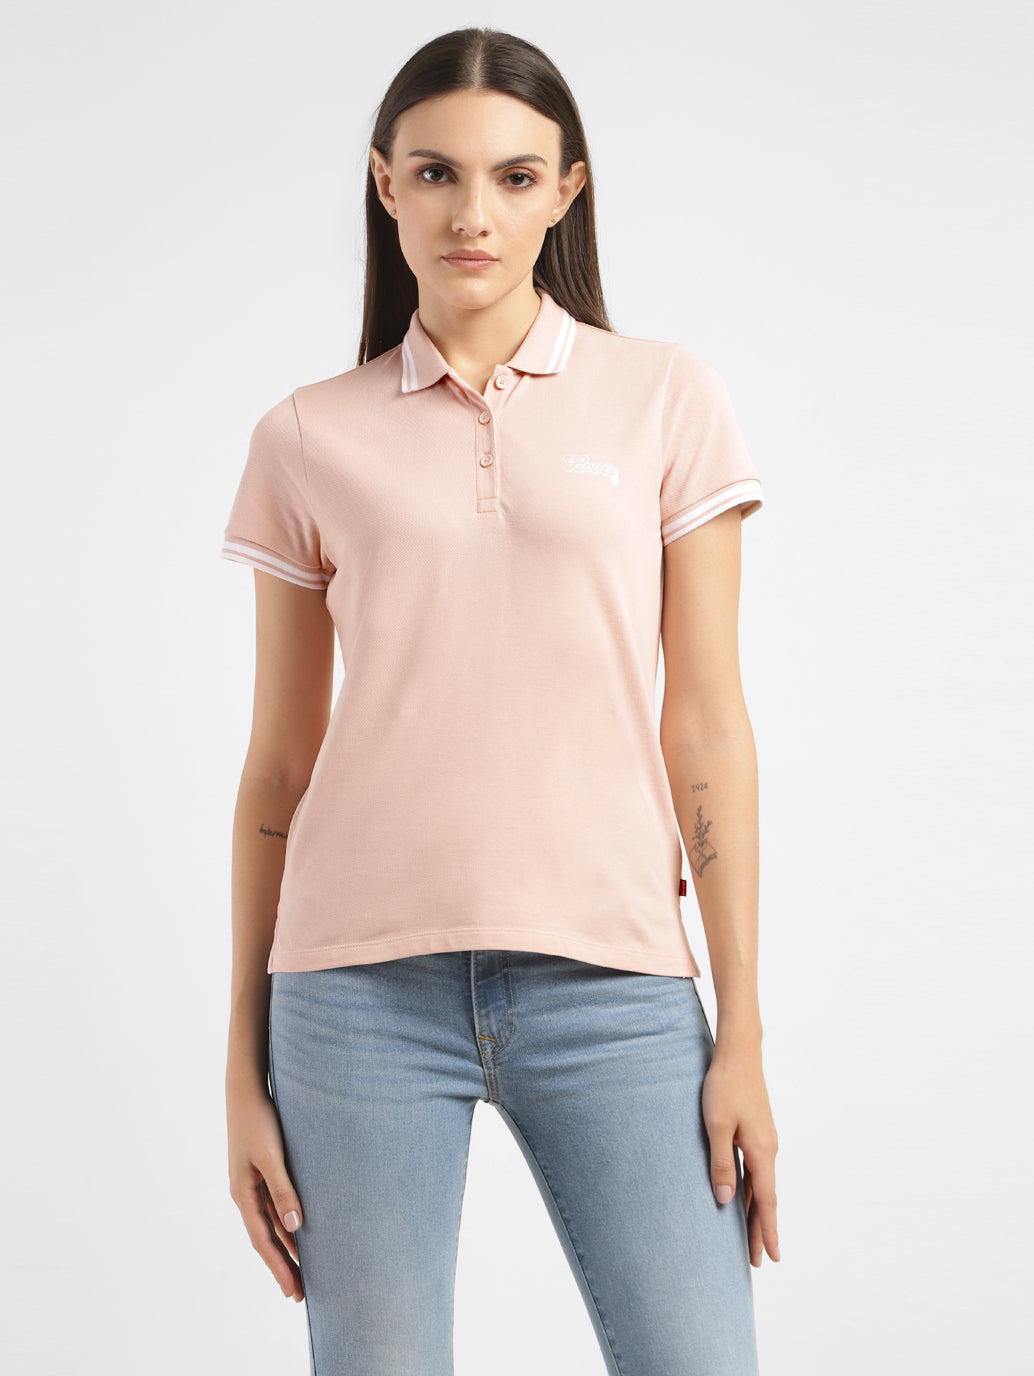 Buy the Perfect T-shirt for women online – Levis India Store